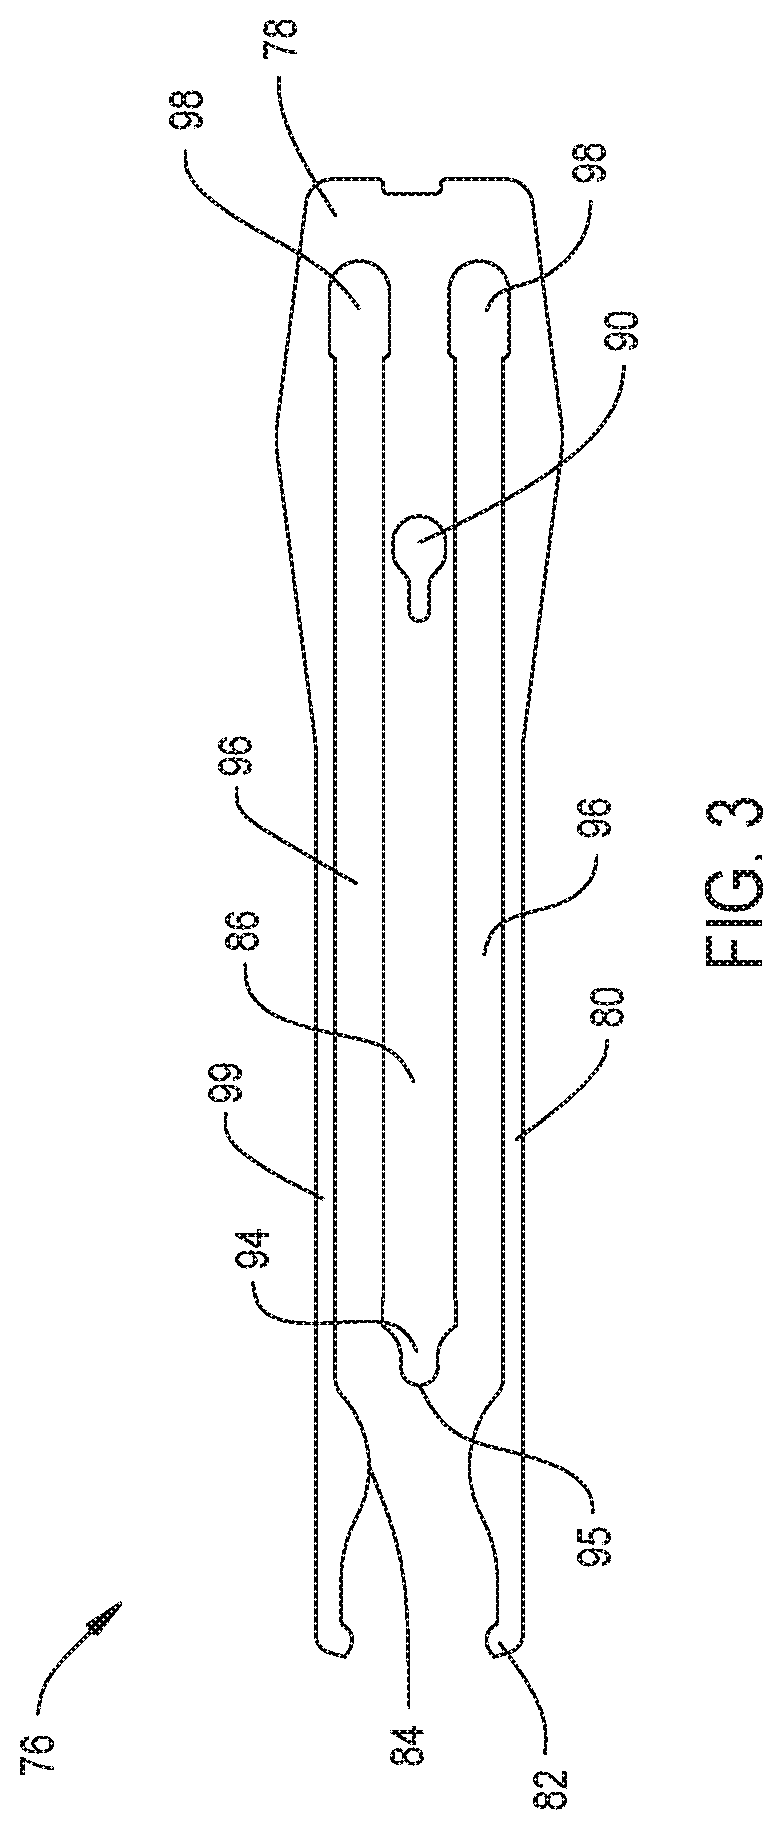 Surgical sagittal blade cartridge with a reinforced guide bar